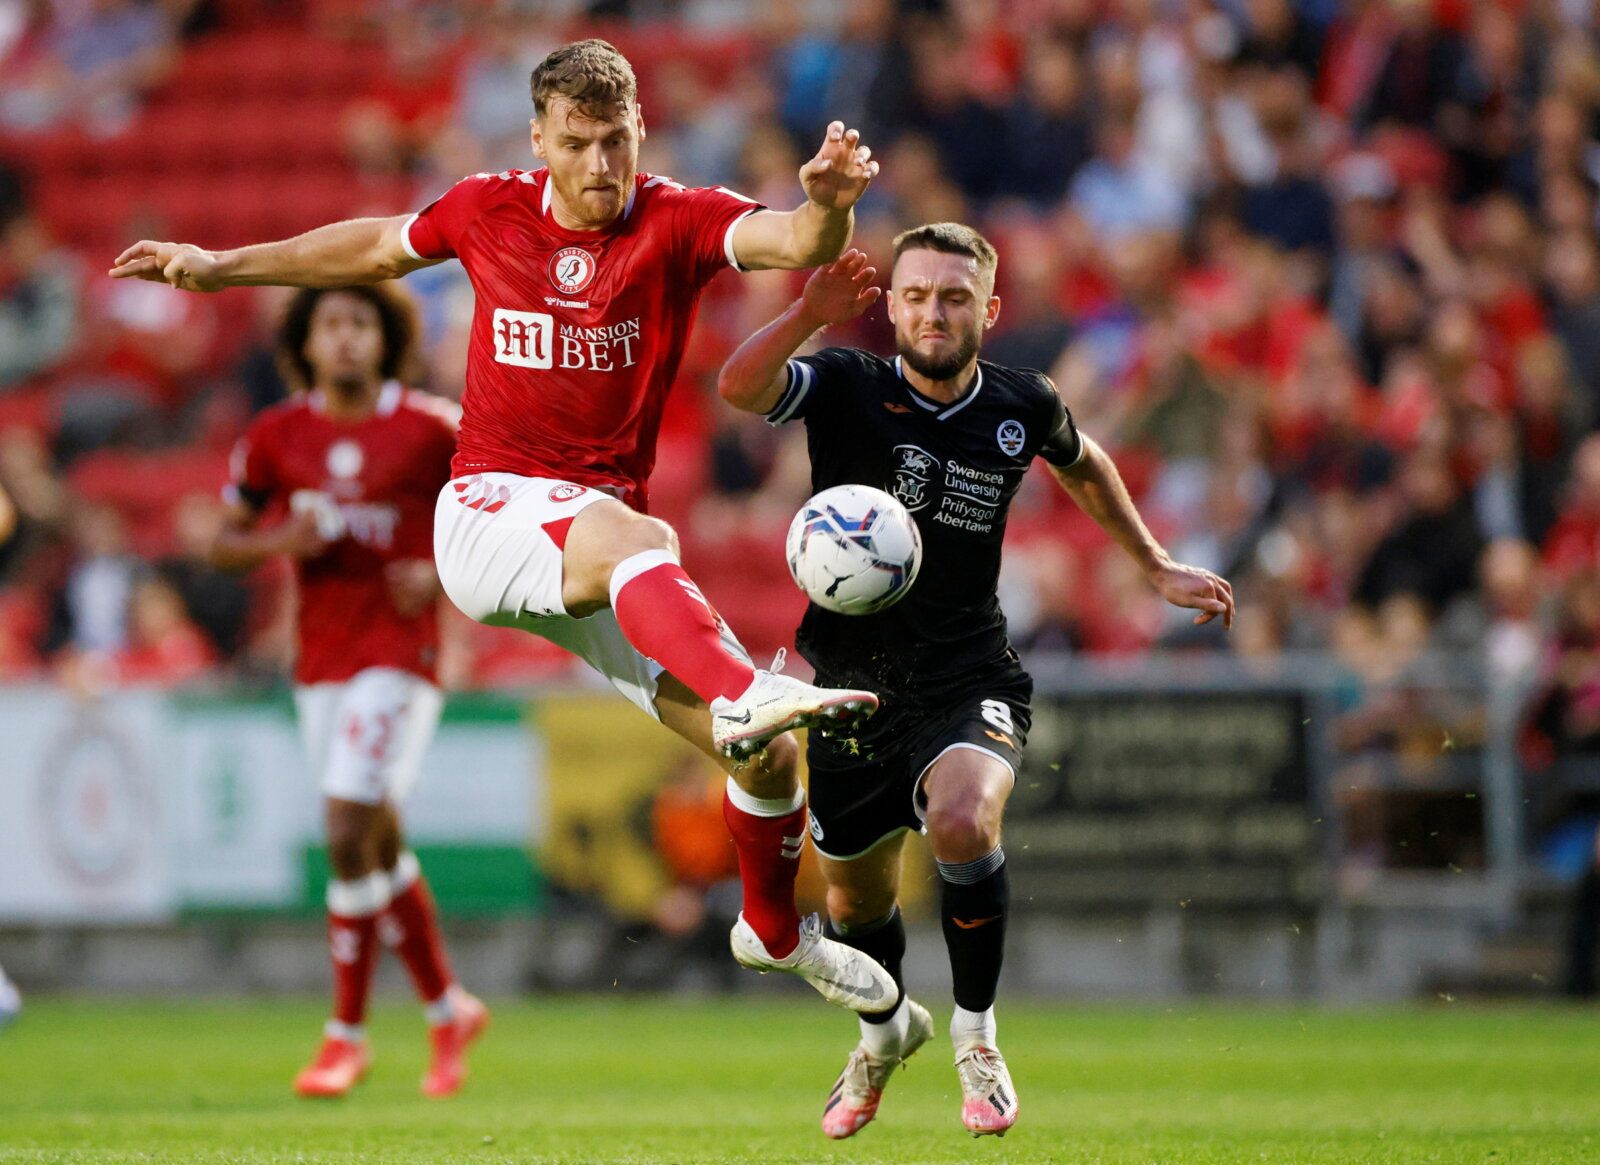 Soccer Football - Championship - Bristol City v Swansea City - Ashton Gate Stadium, Bristol, Britain - August 20, 2021  Bristol City’s Chris Martin in action with Swansea City's Matt Grimes  Action Images/John Sibley  EDITORIAL USE ONLY. No use with unauthorized audio, video, data, fixture lists, club/league logos or 